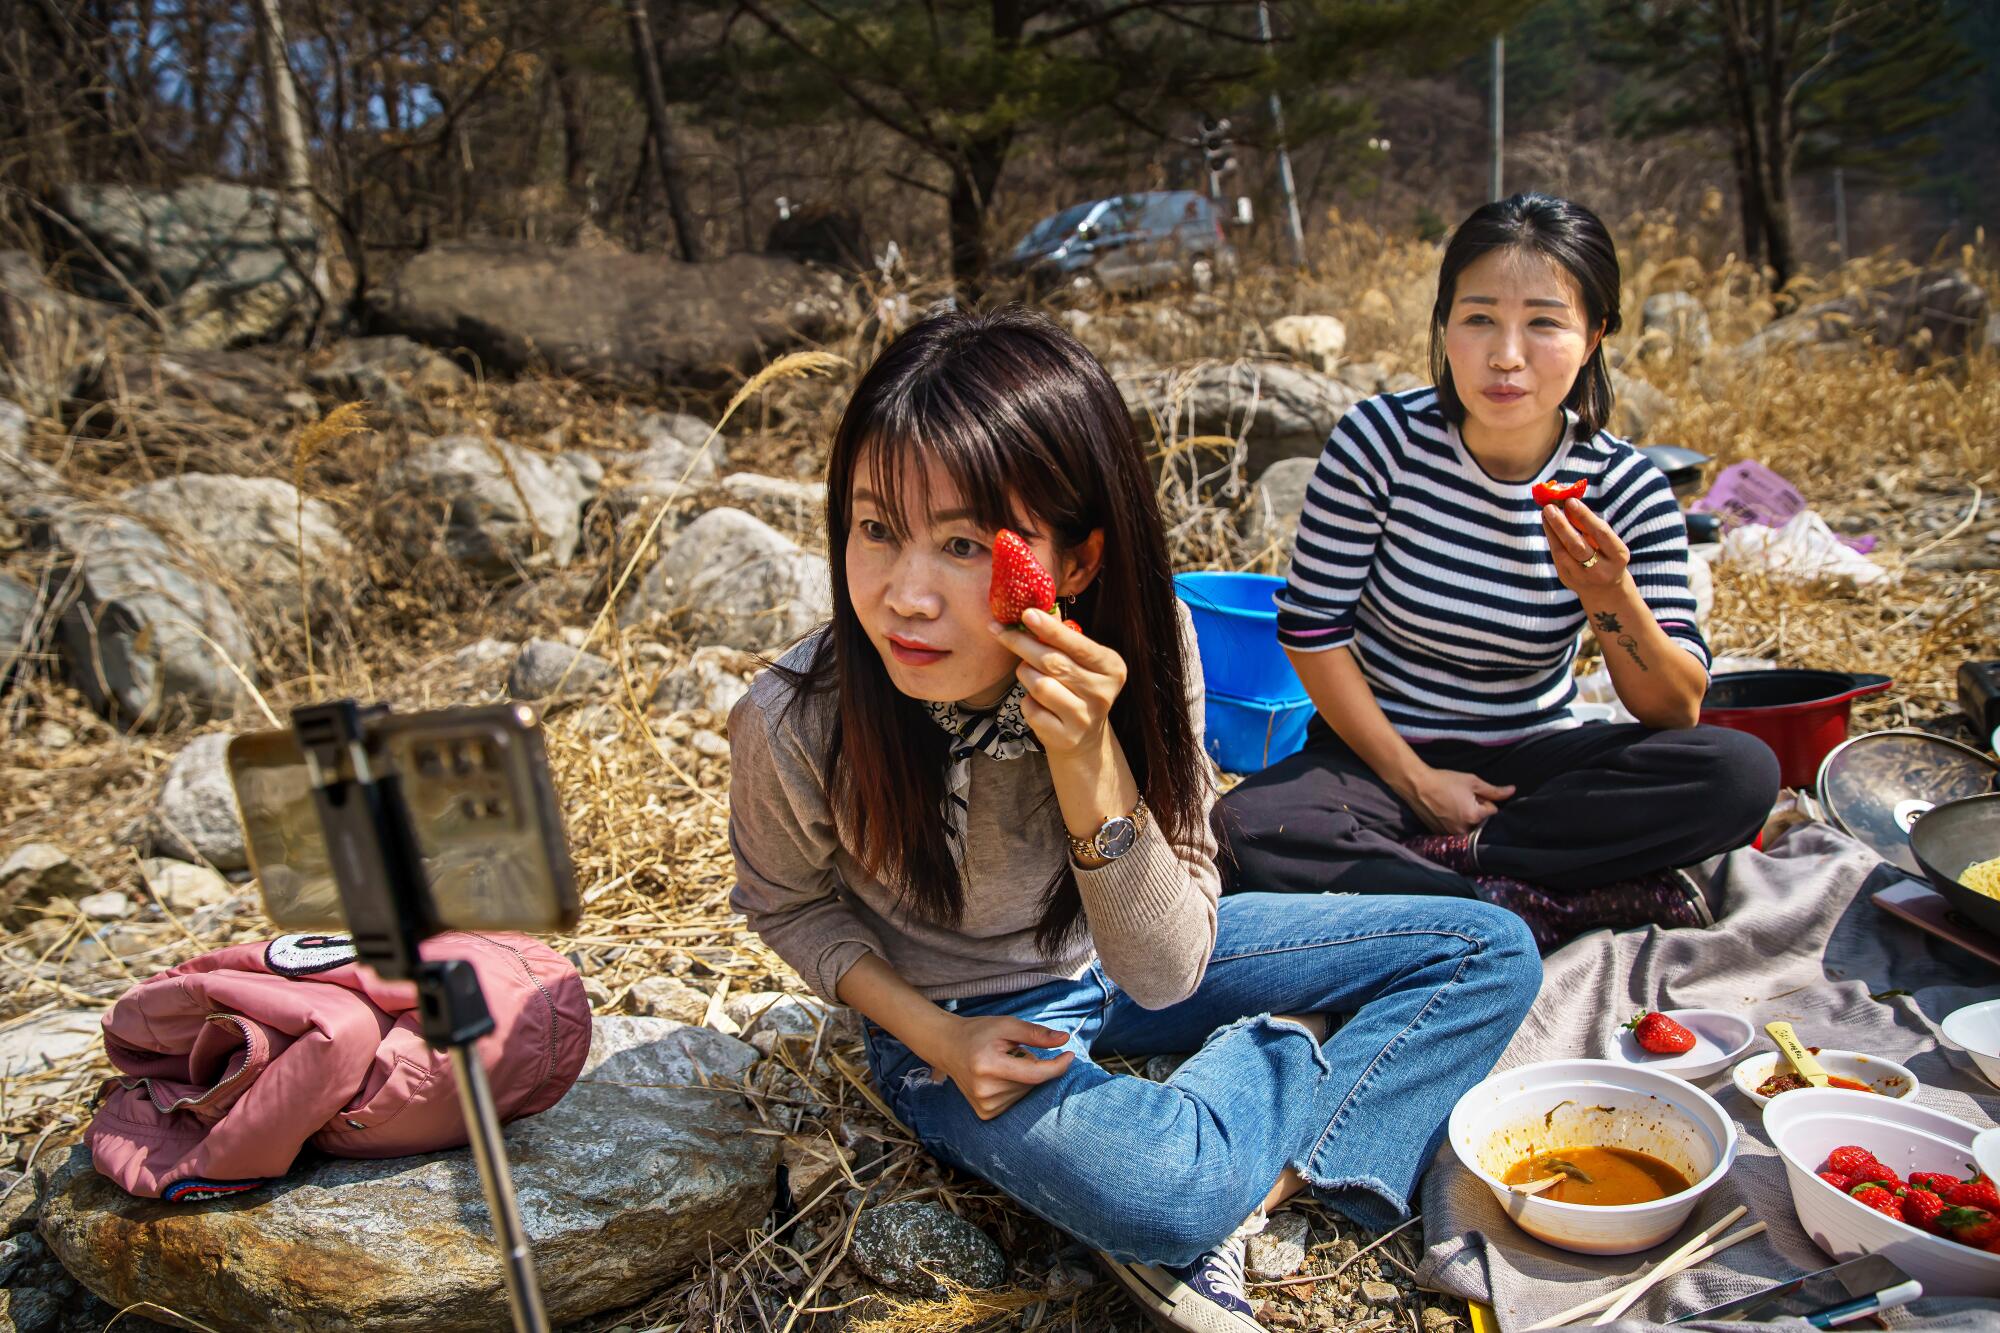 Sim Ha Yoon, left, and Seok Hyeon Ju document their afternoon together preparing food and picnicking.